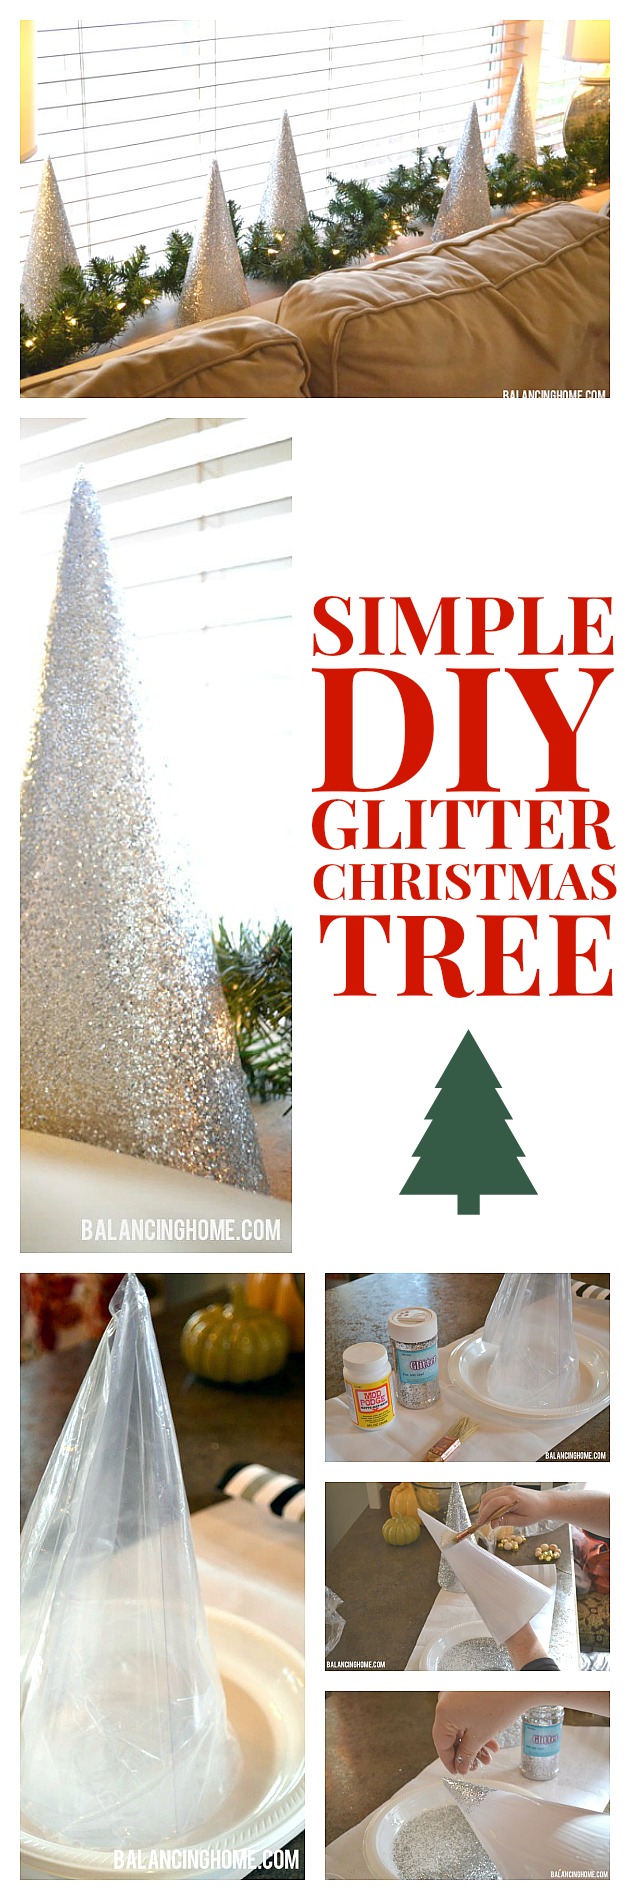 So simple--the kids could do it. DIY glitter Christmas tree for a fraction of the cost.